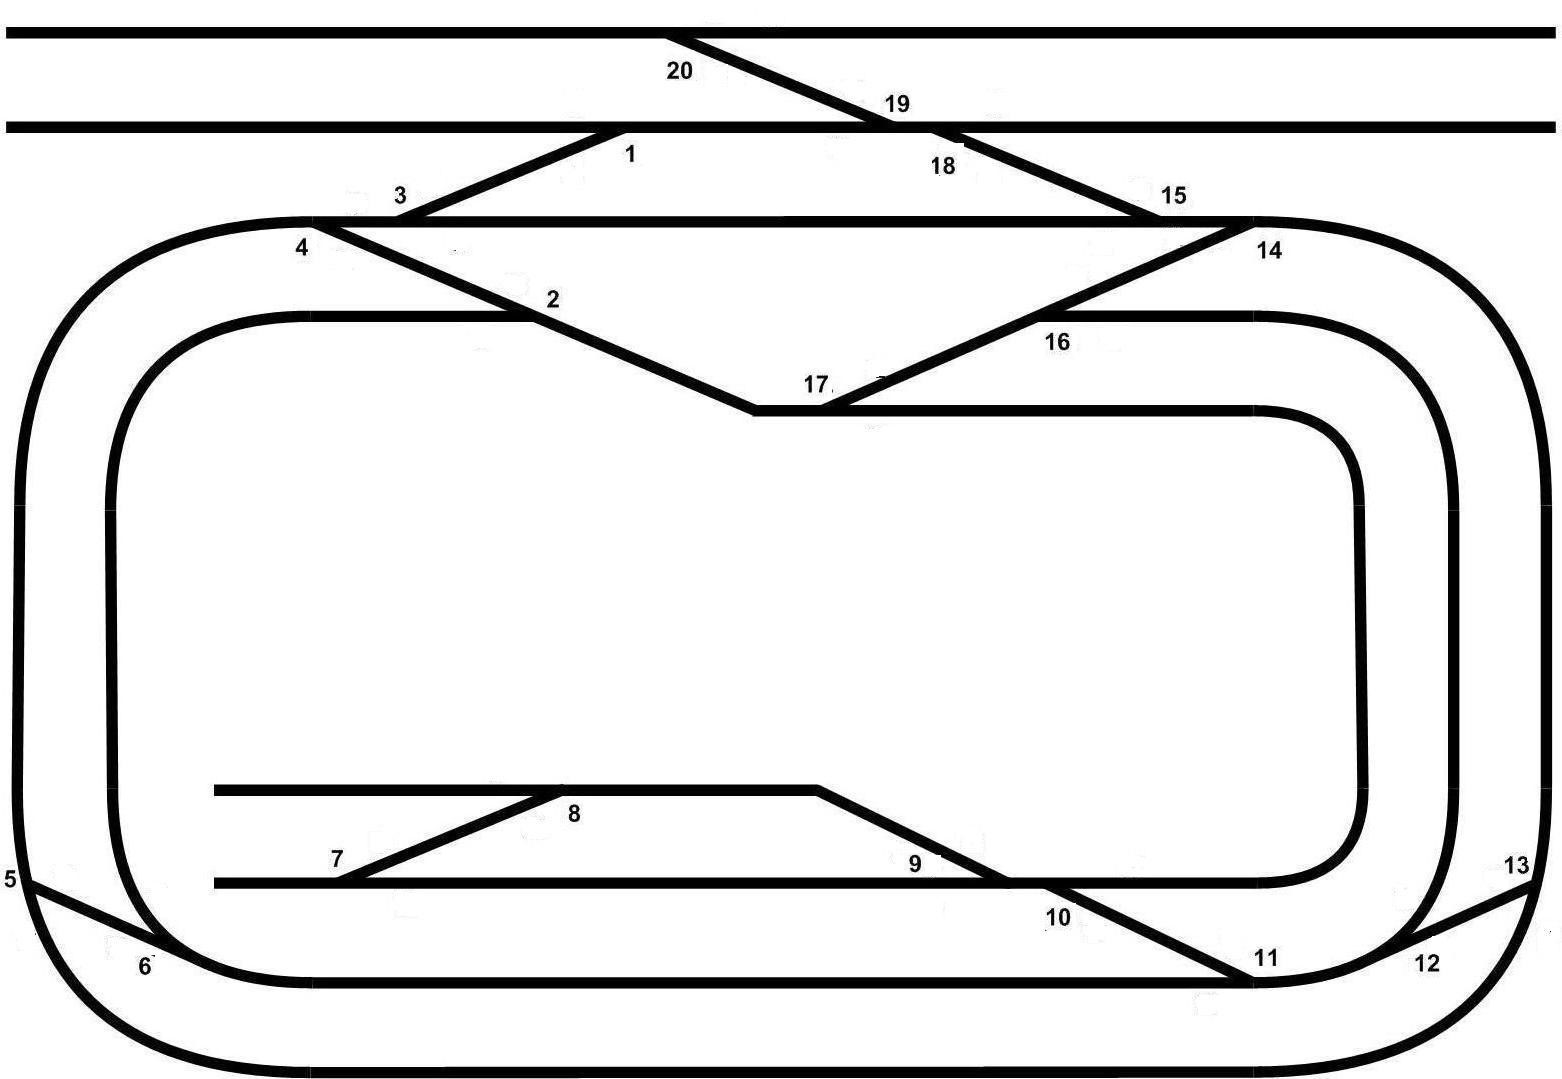 Figure 2:  BMRC 10’ x 4’ Board Track Design as used on Point Motor Control Box.